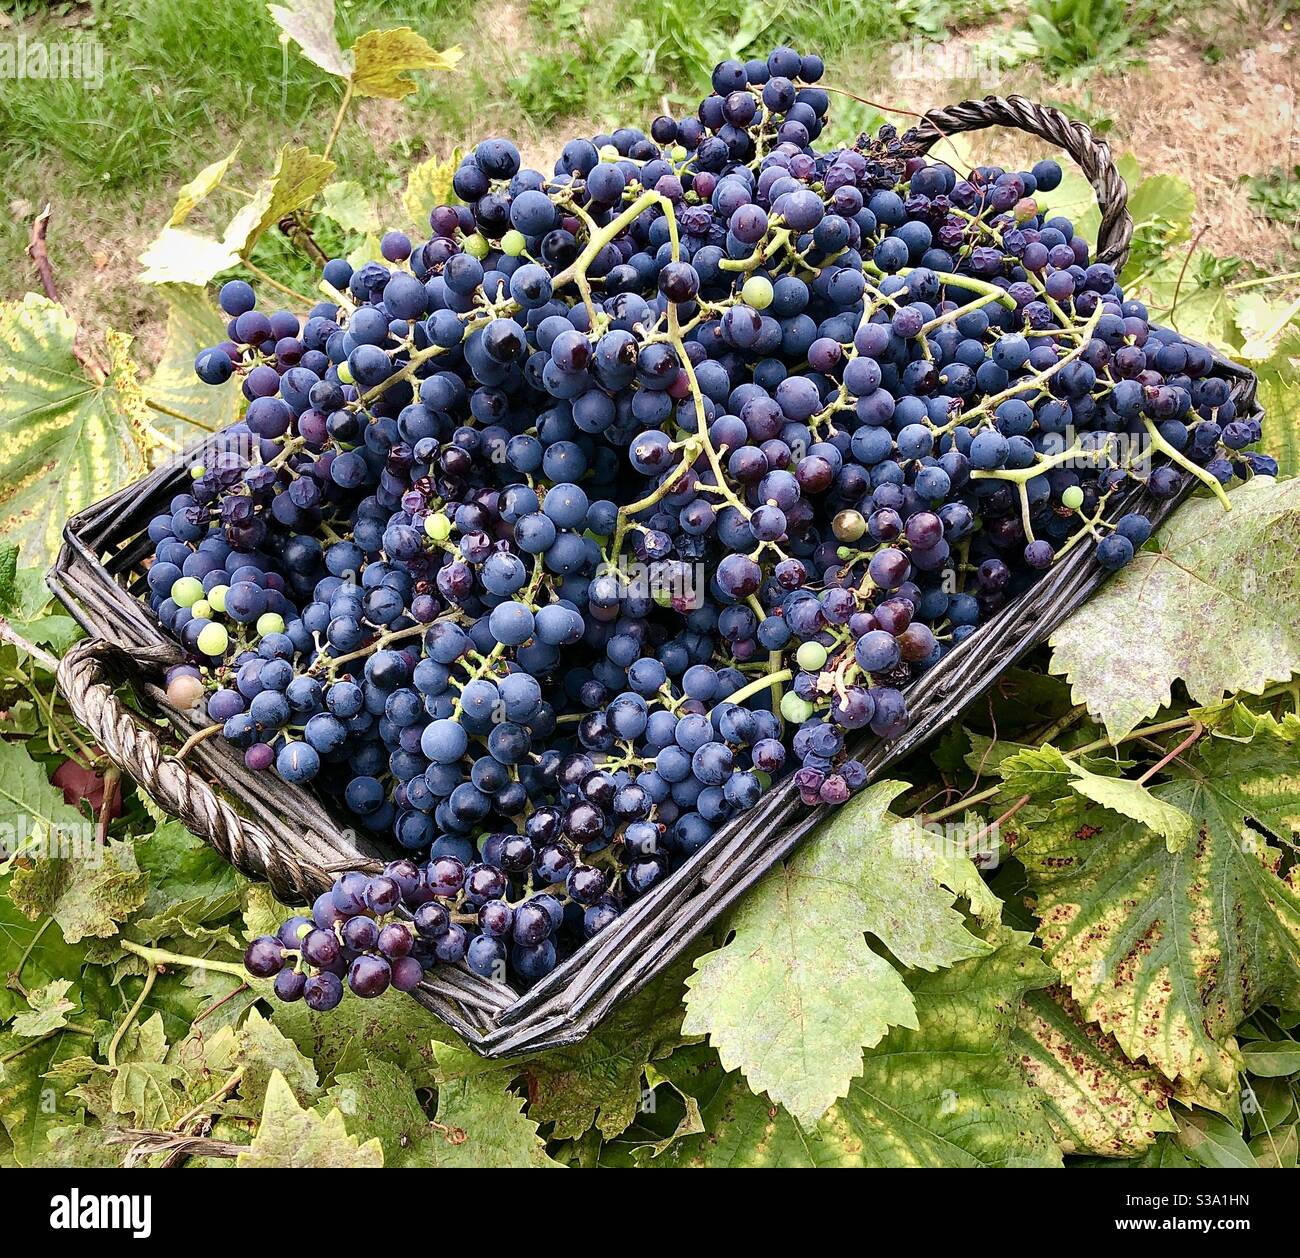 Wicker panier basket filled with freshly picked black grapes. Stock Photo